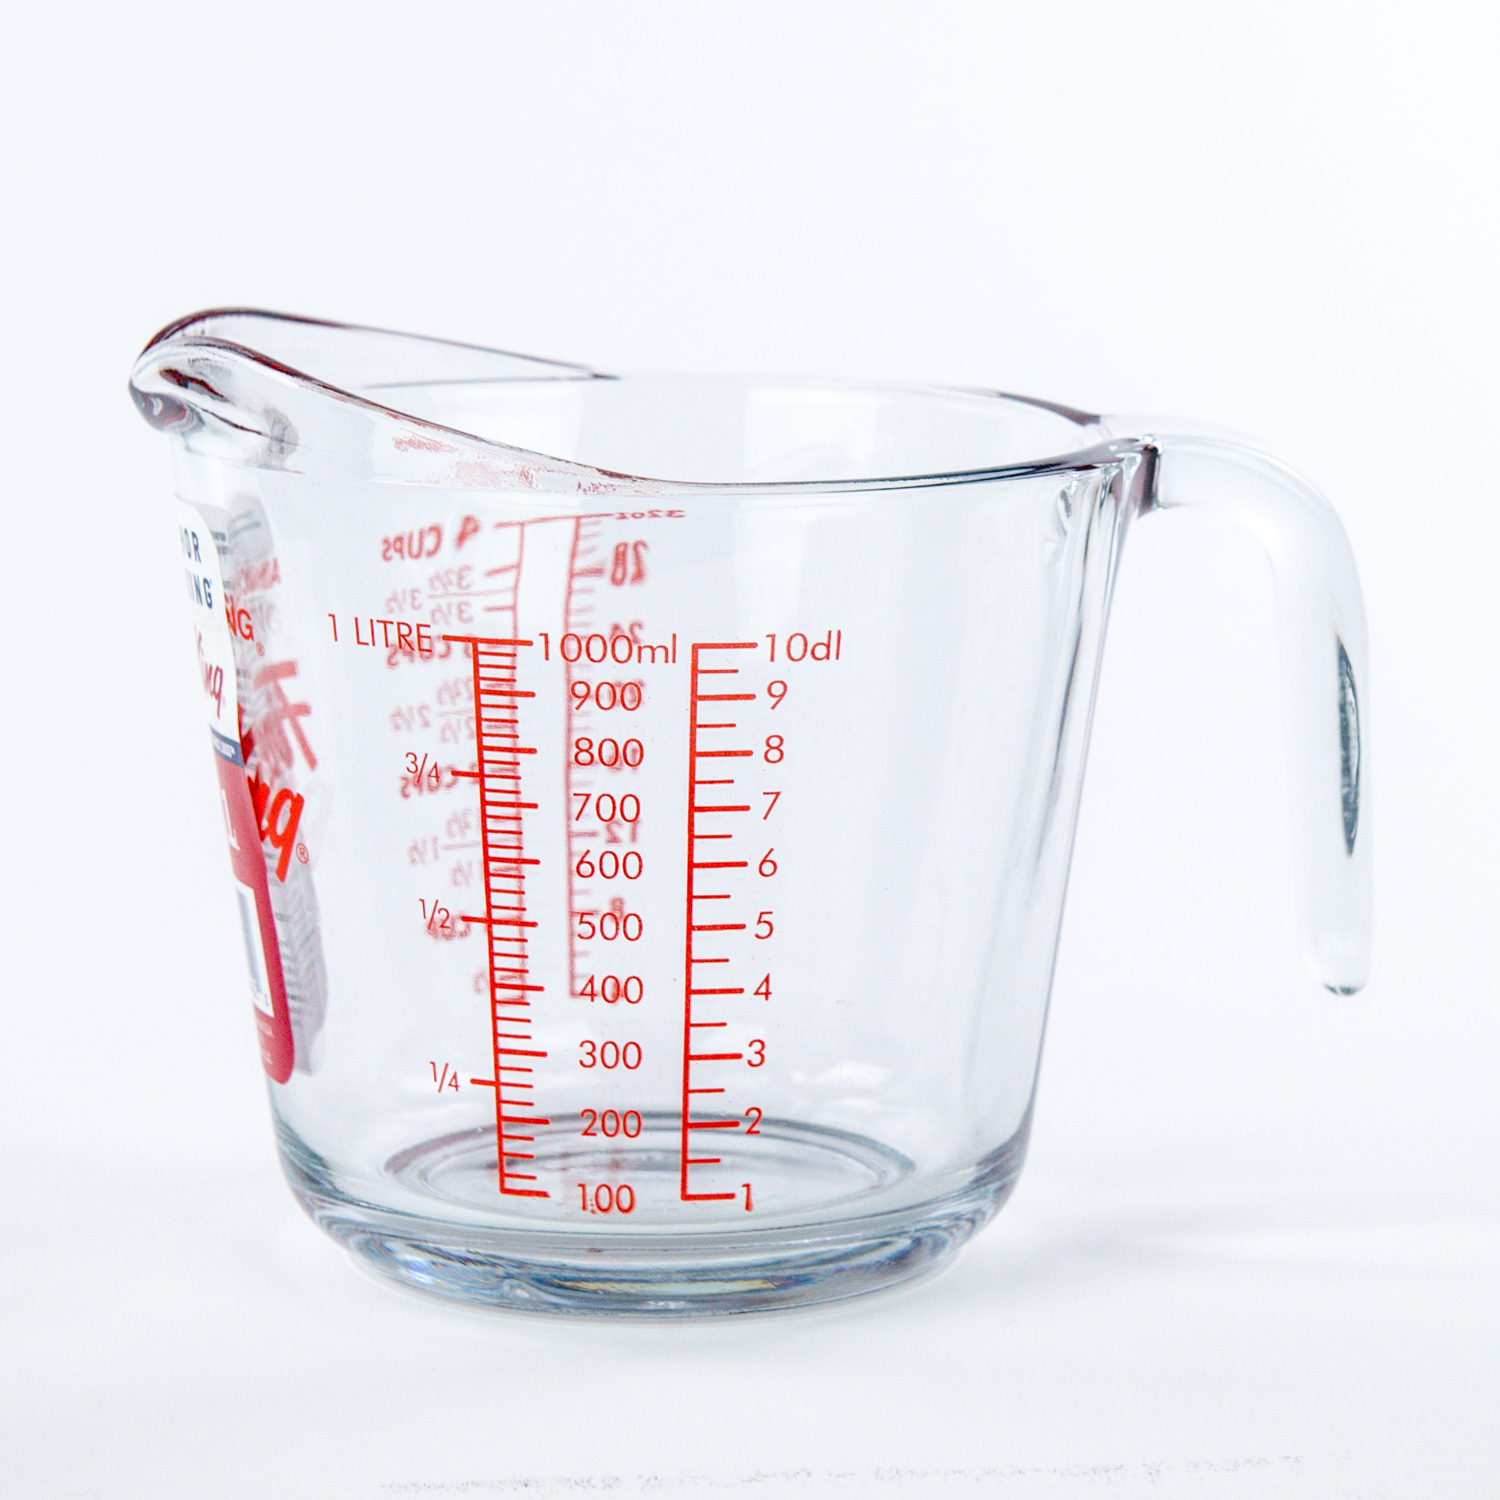 32 oz Measuring Cup - Measuring cup, spoon and scale